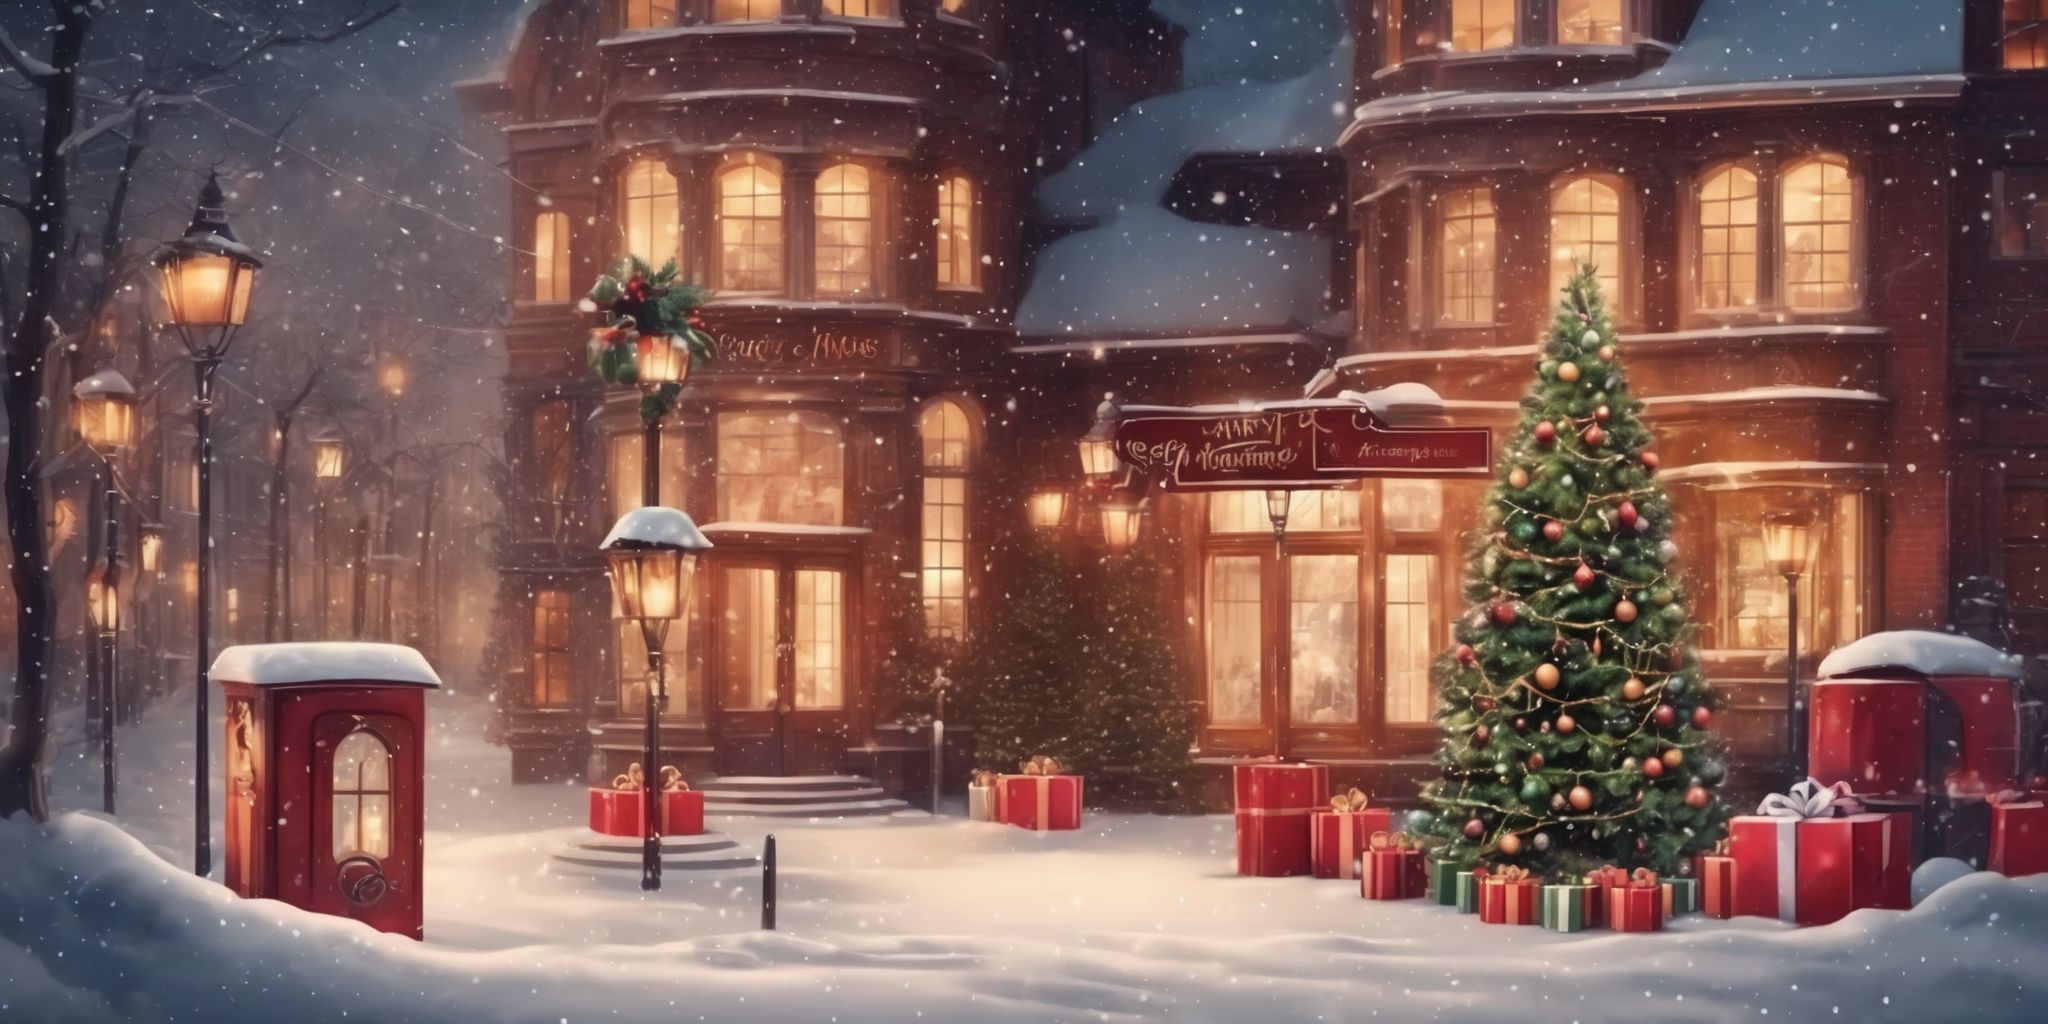 Location in realistic Christmas style